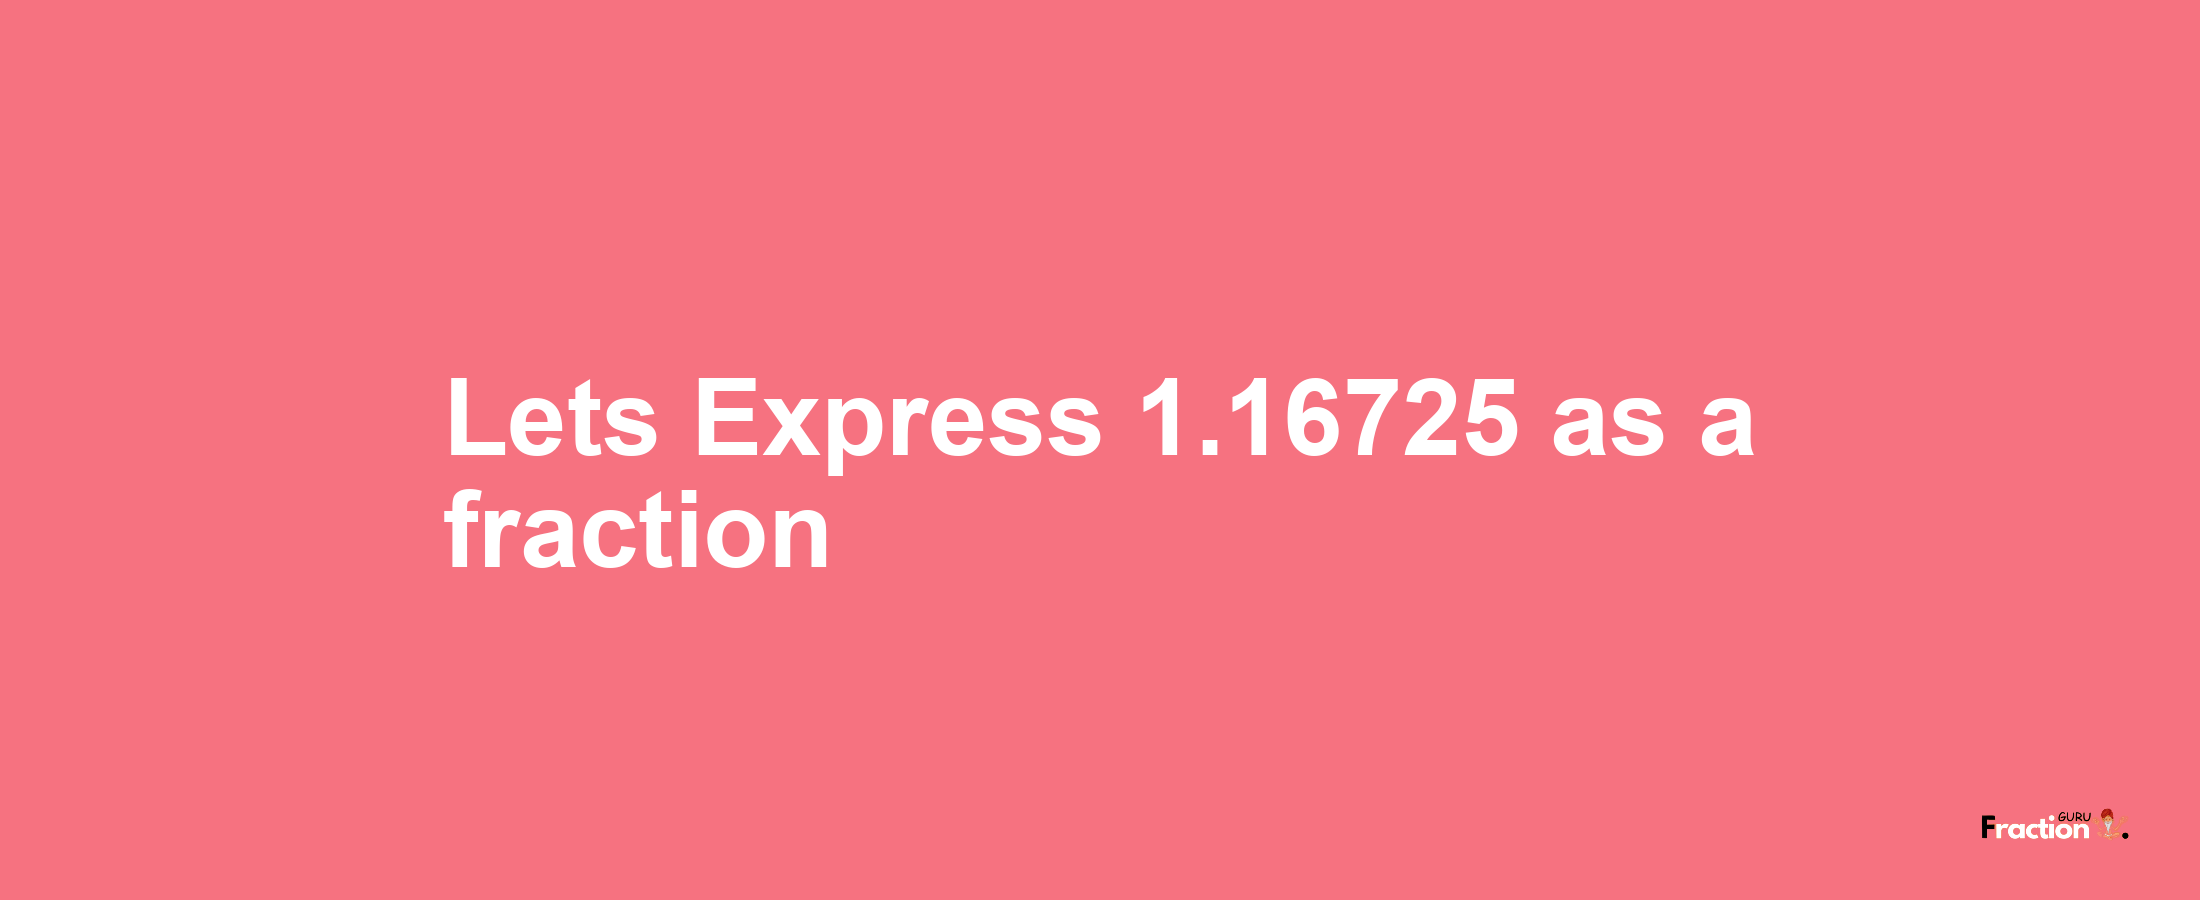 Lets Express 1.16725 as afraction